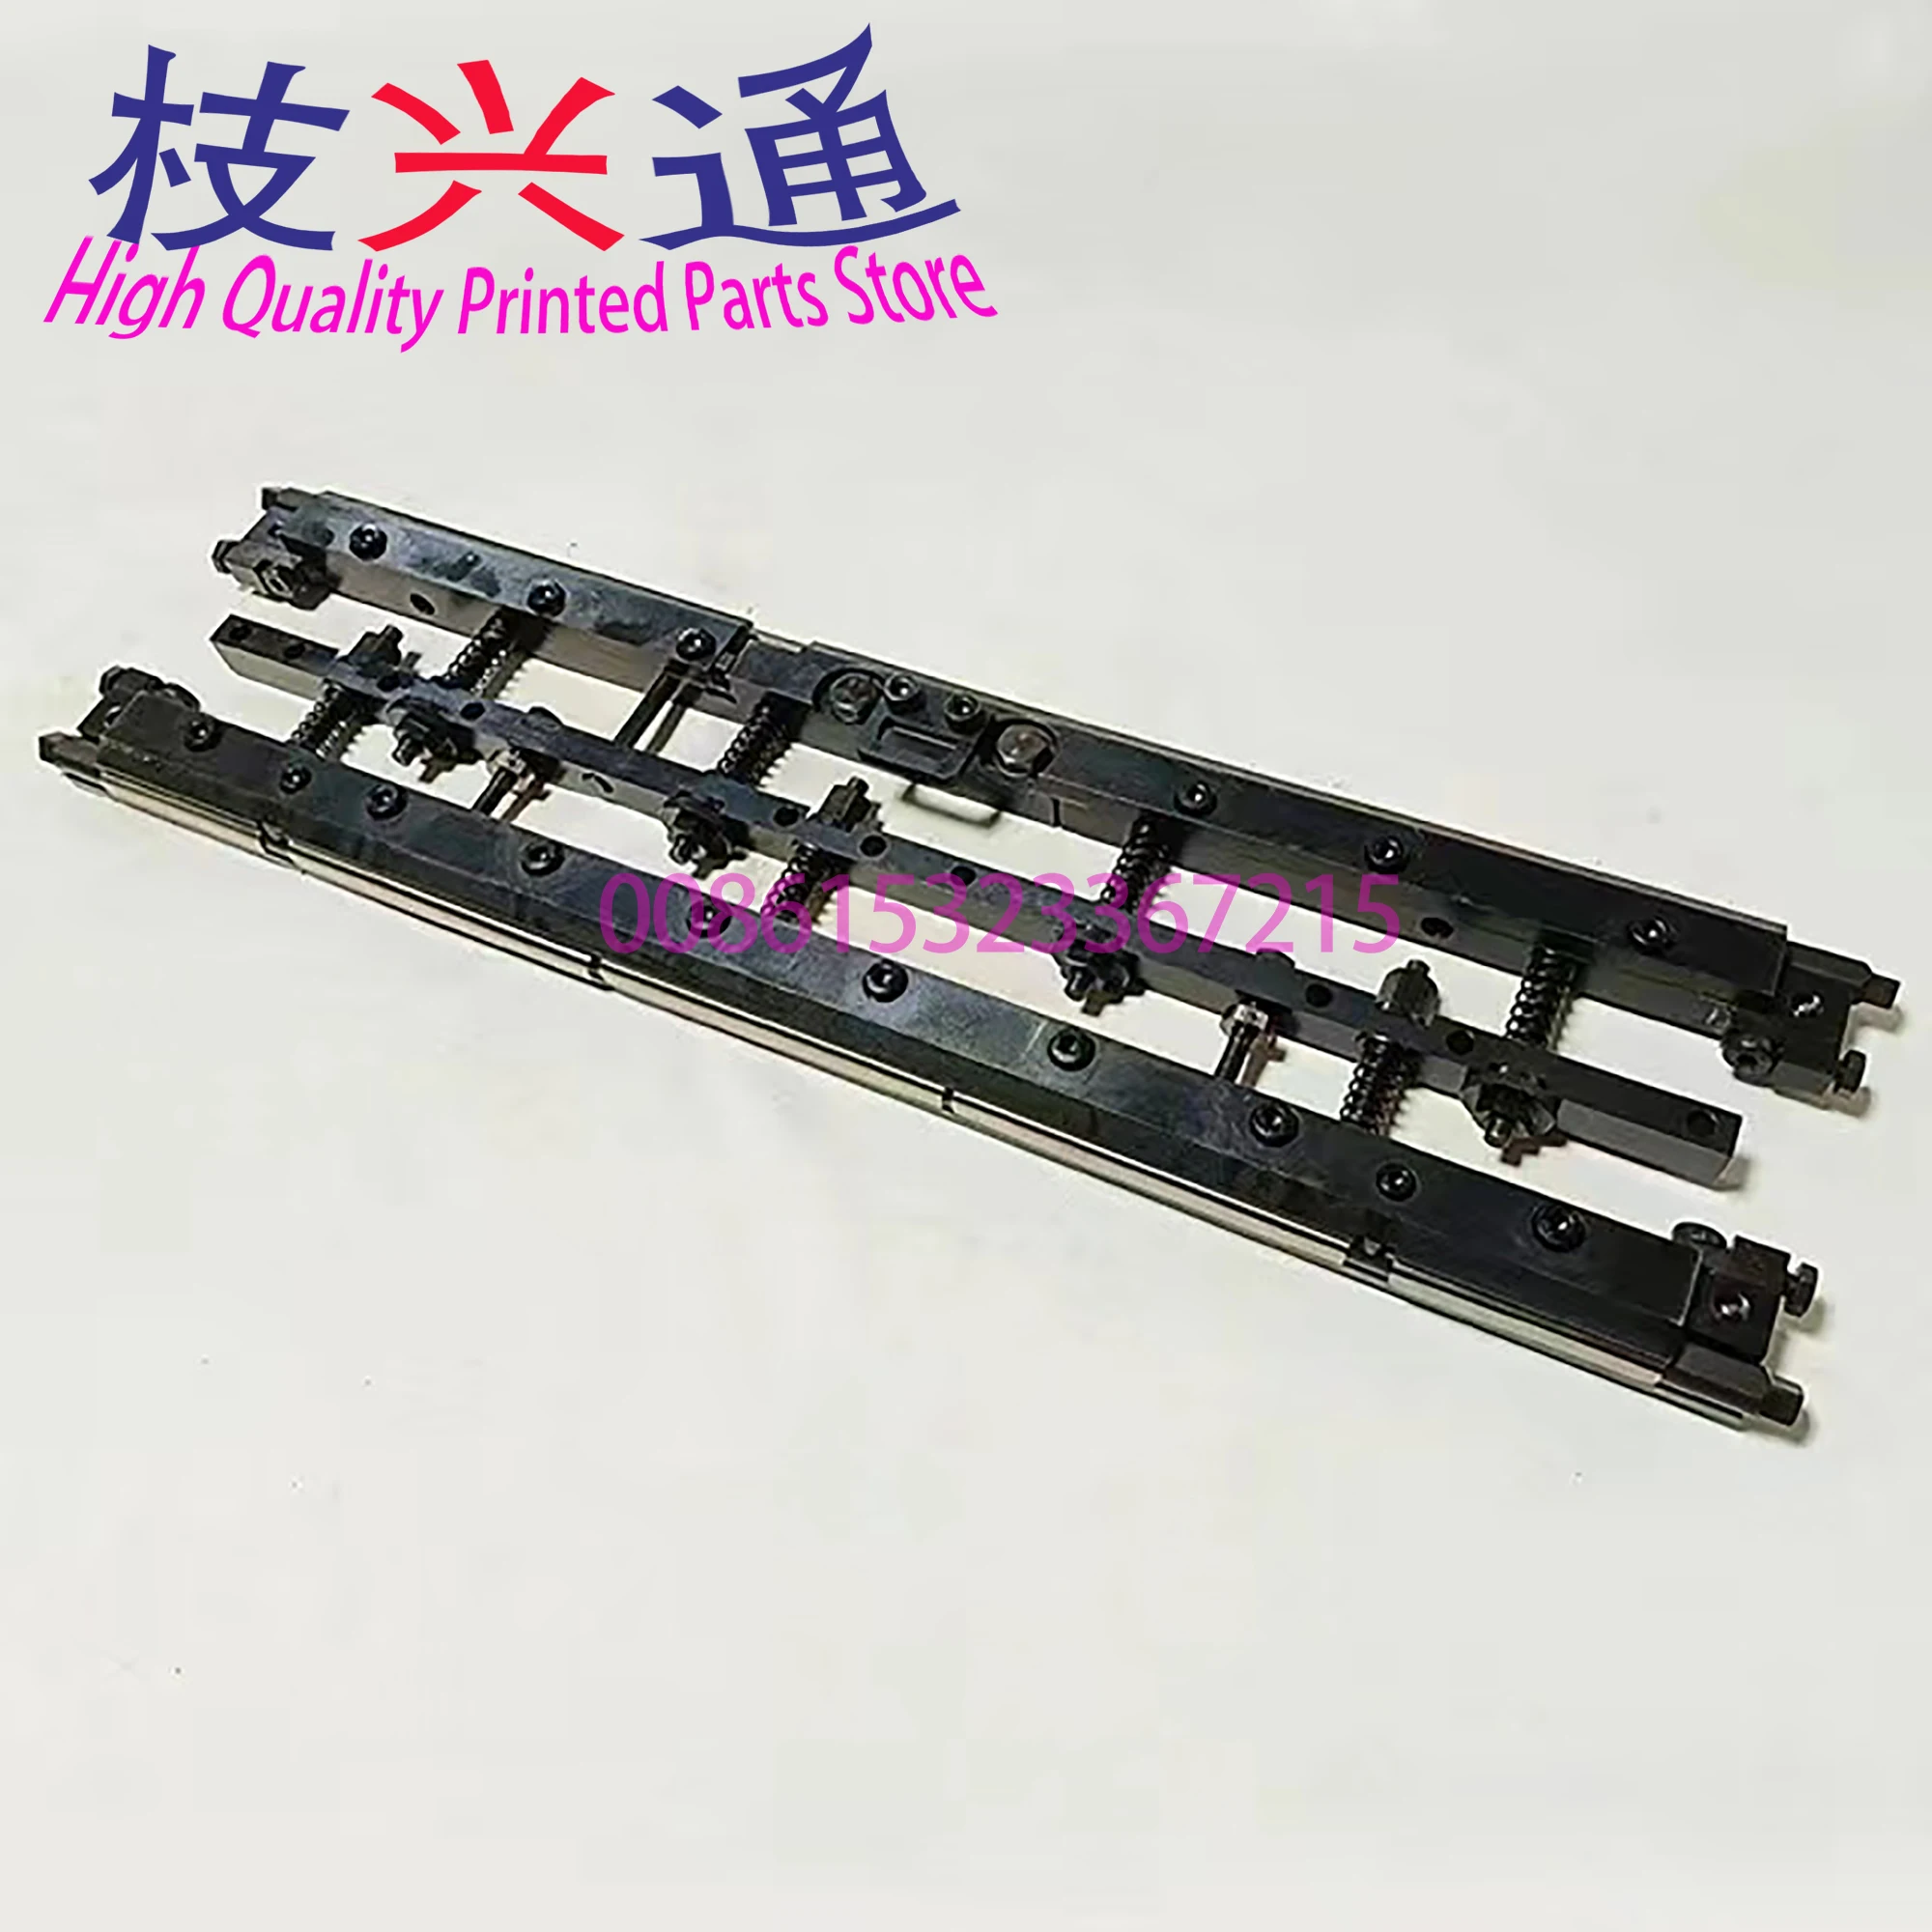 

43.007.200 MO Printing Machine Quick Action Plate Clamp